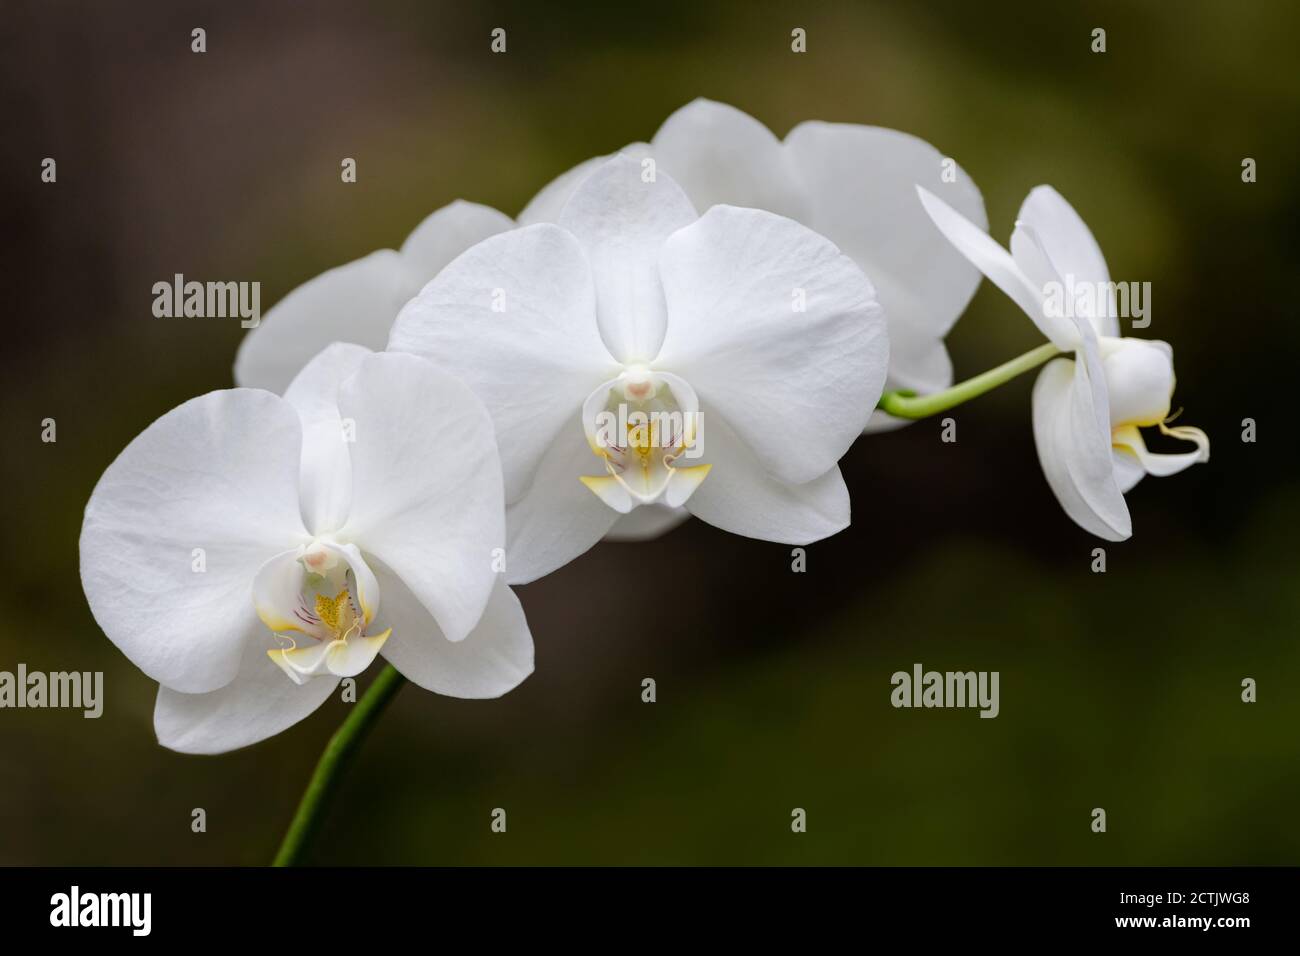 A stem with white Orchid blossoms on dark background with space for type Stock Photo